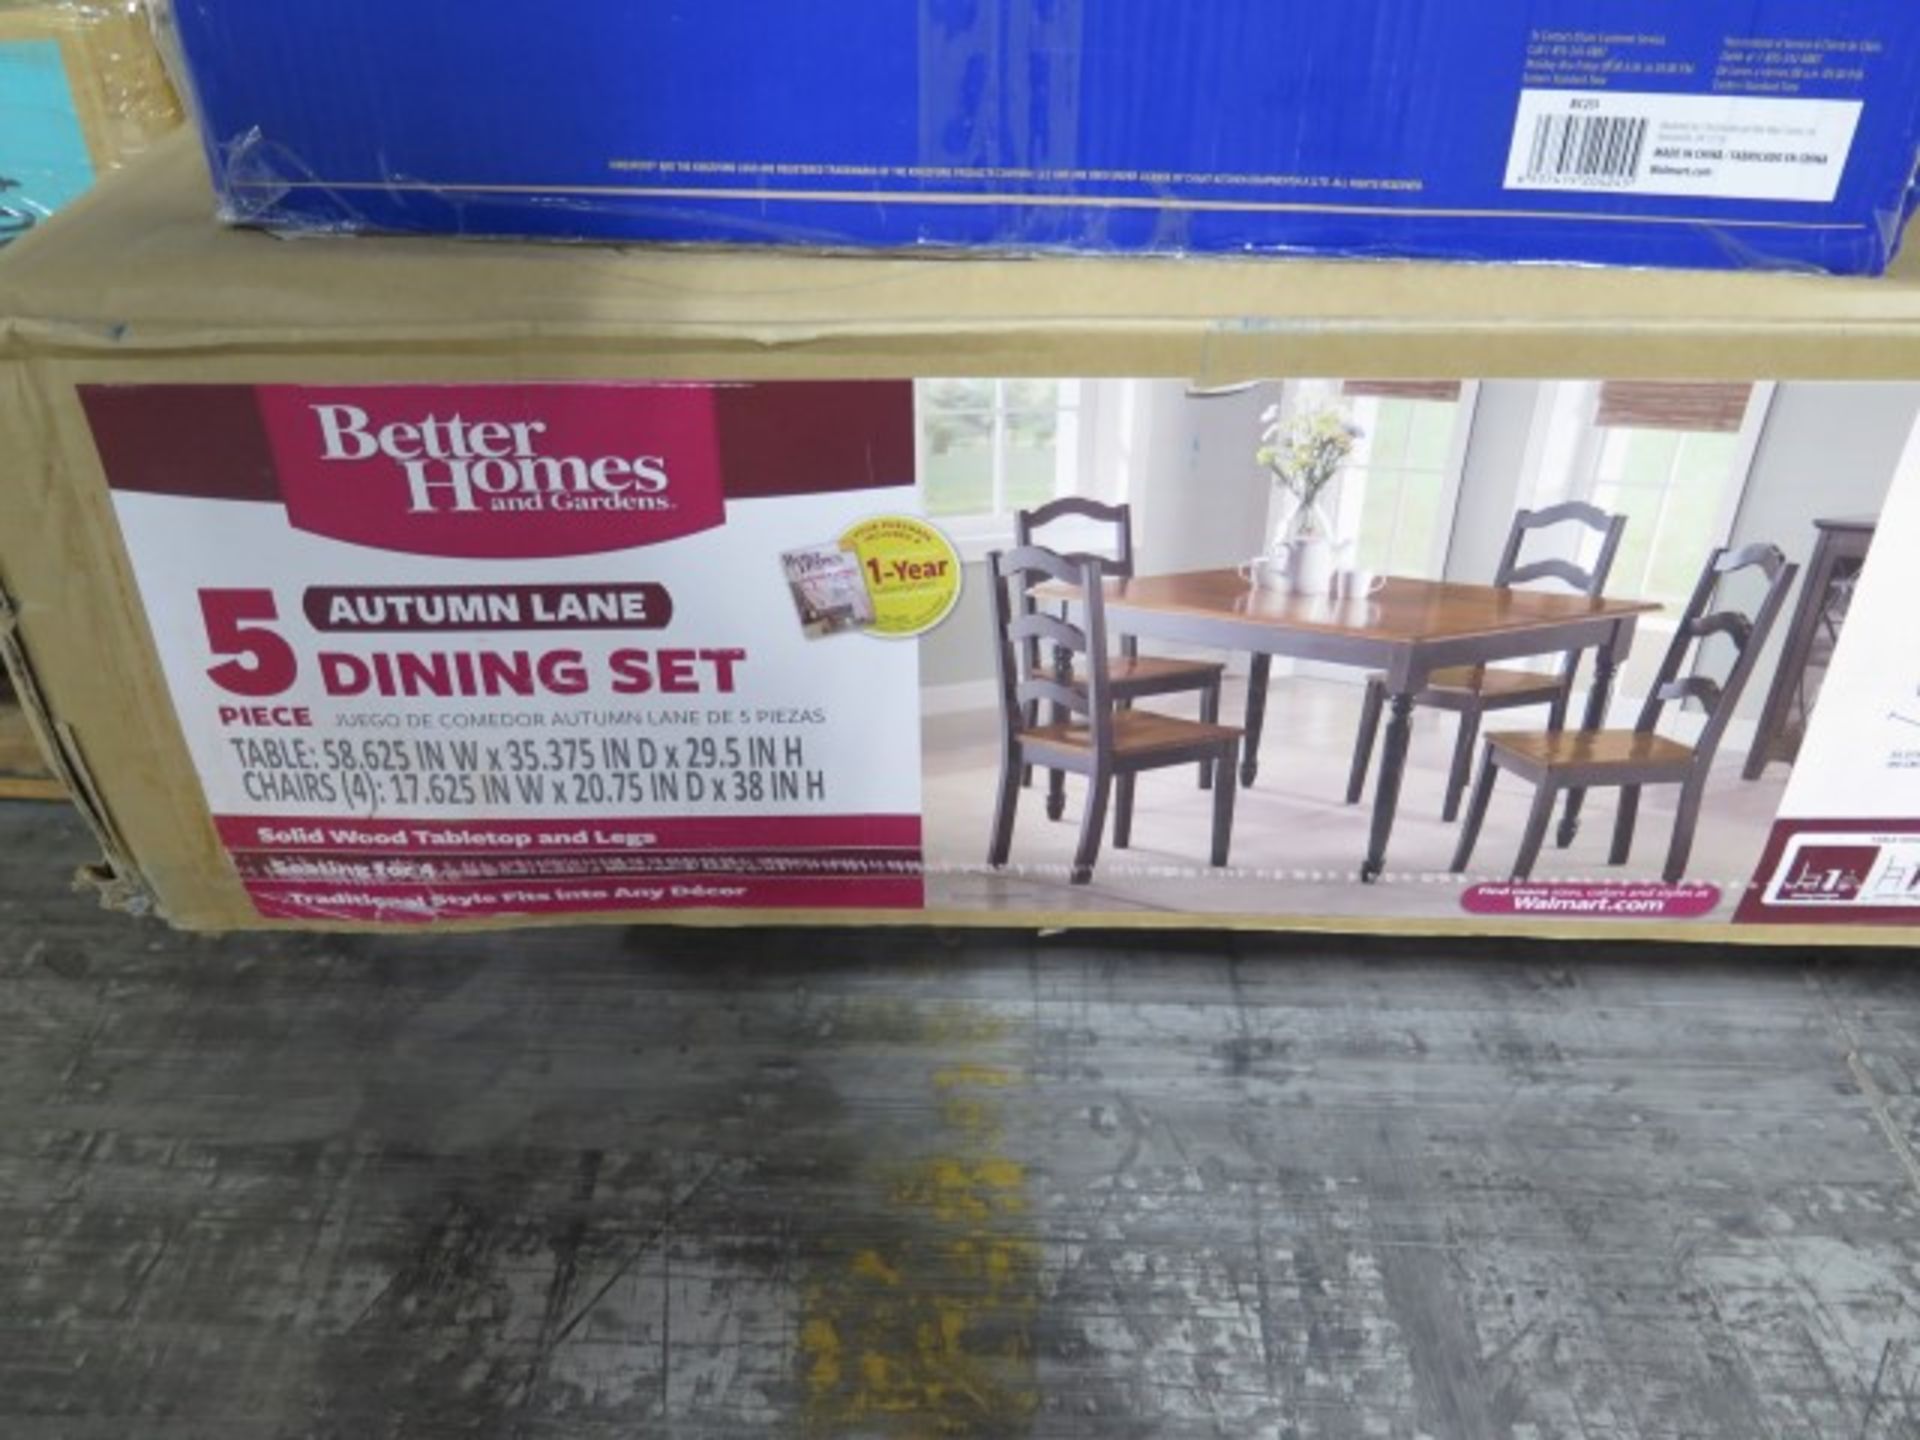 Lot of Grills, Furniture & Sporting Goods with $987 ESTIMATED retail value. Lot includesBackyard 3